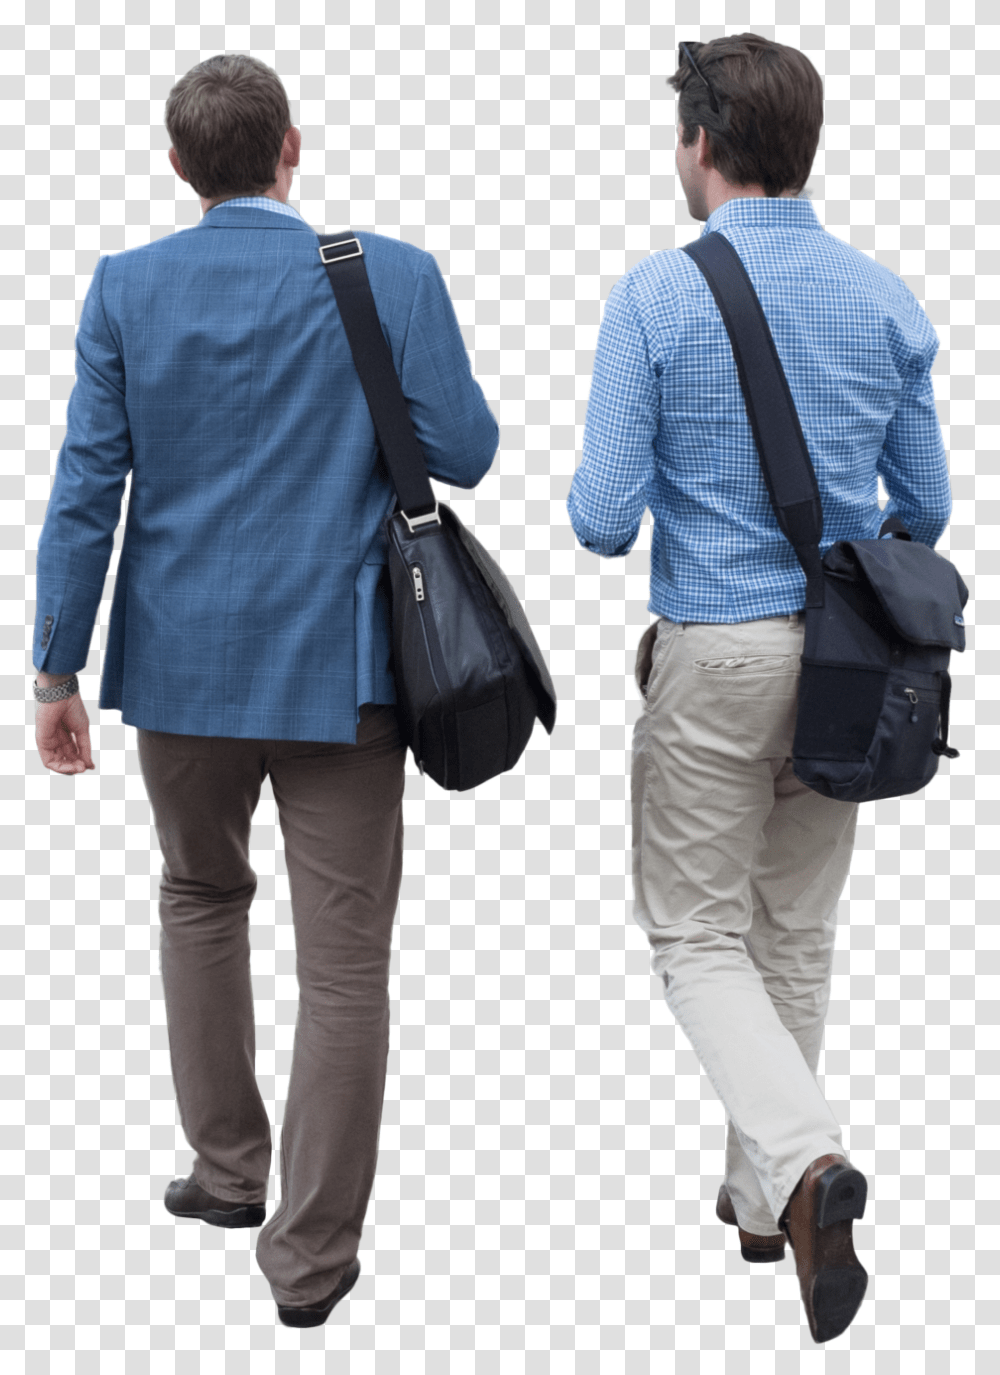 Men Walking & Clipart Free Download Ywd People Walking Away, Clothing, Person, Sleeve, Suspenders Transparent Png